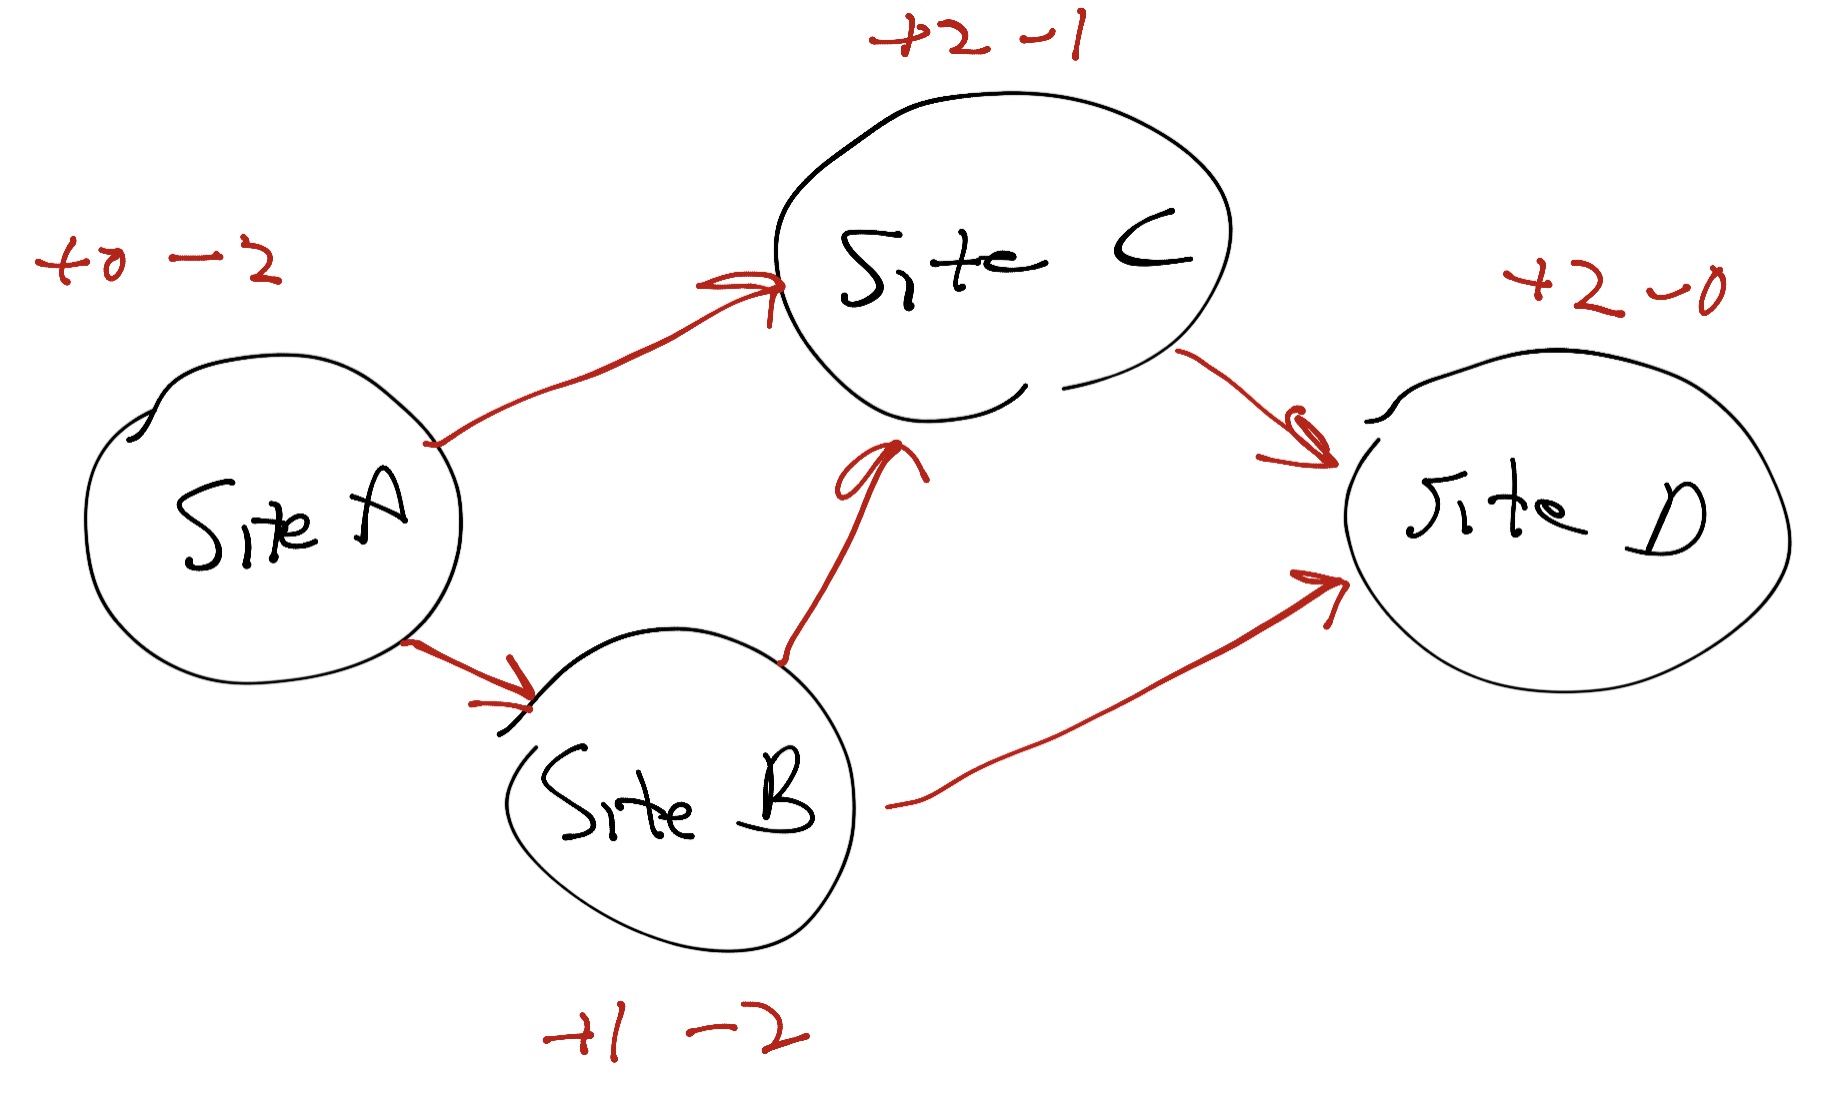 Network graph example